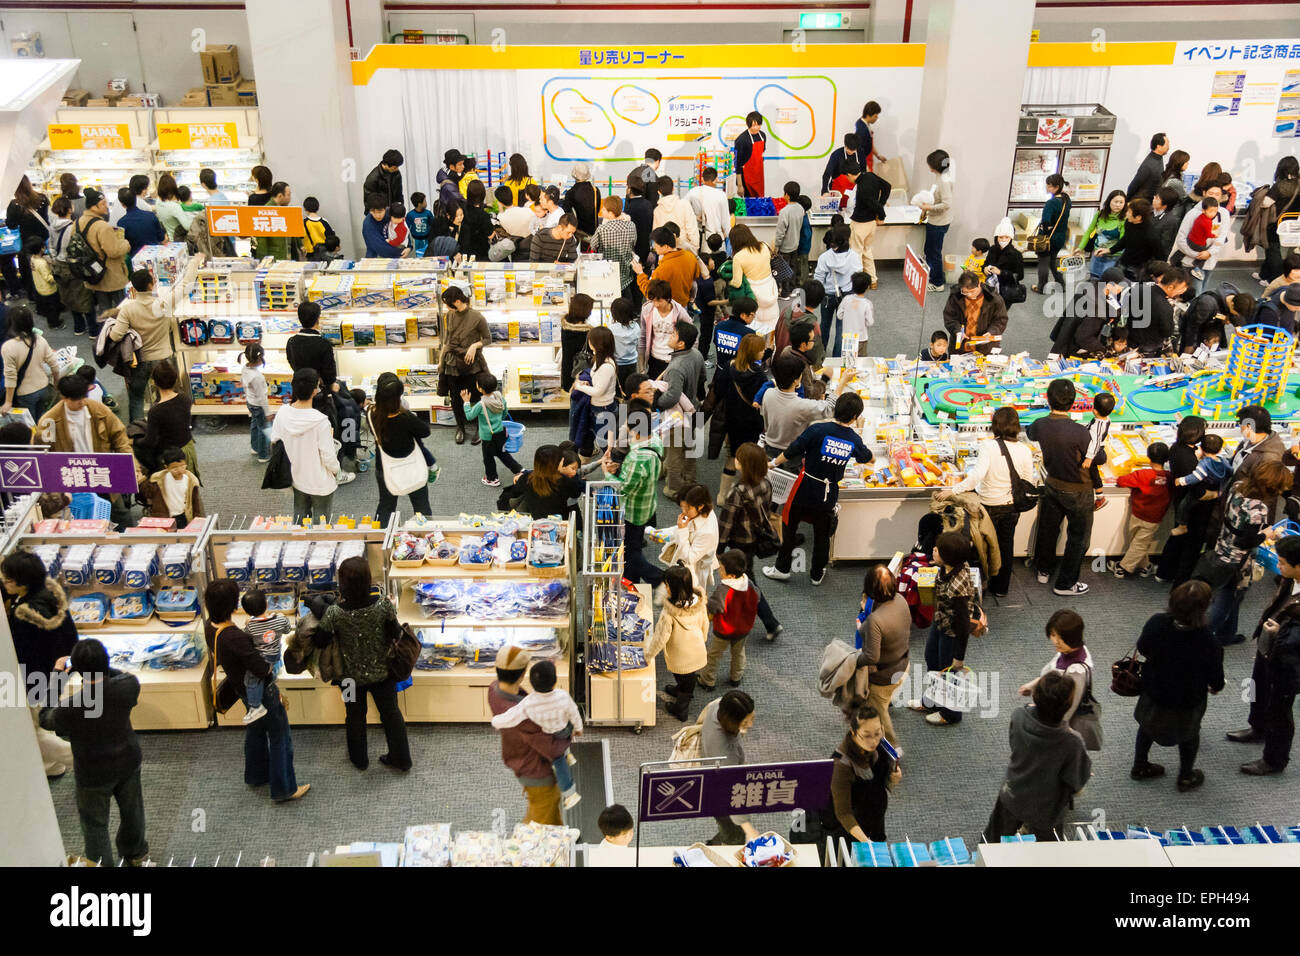 Overhead view of toy Tommy train promotional event in Osaka, Japan. Crowded hall with families looking at many stalls selling products . Stock Photo